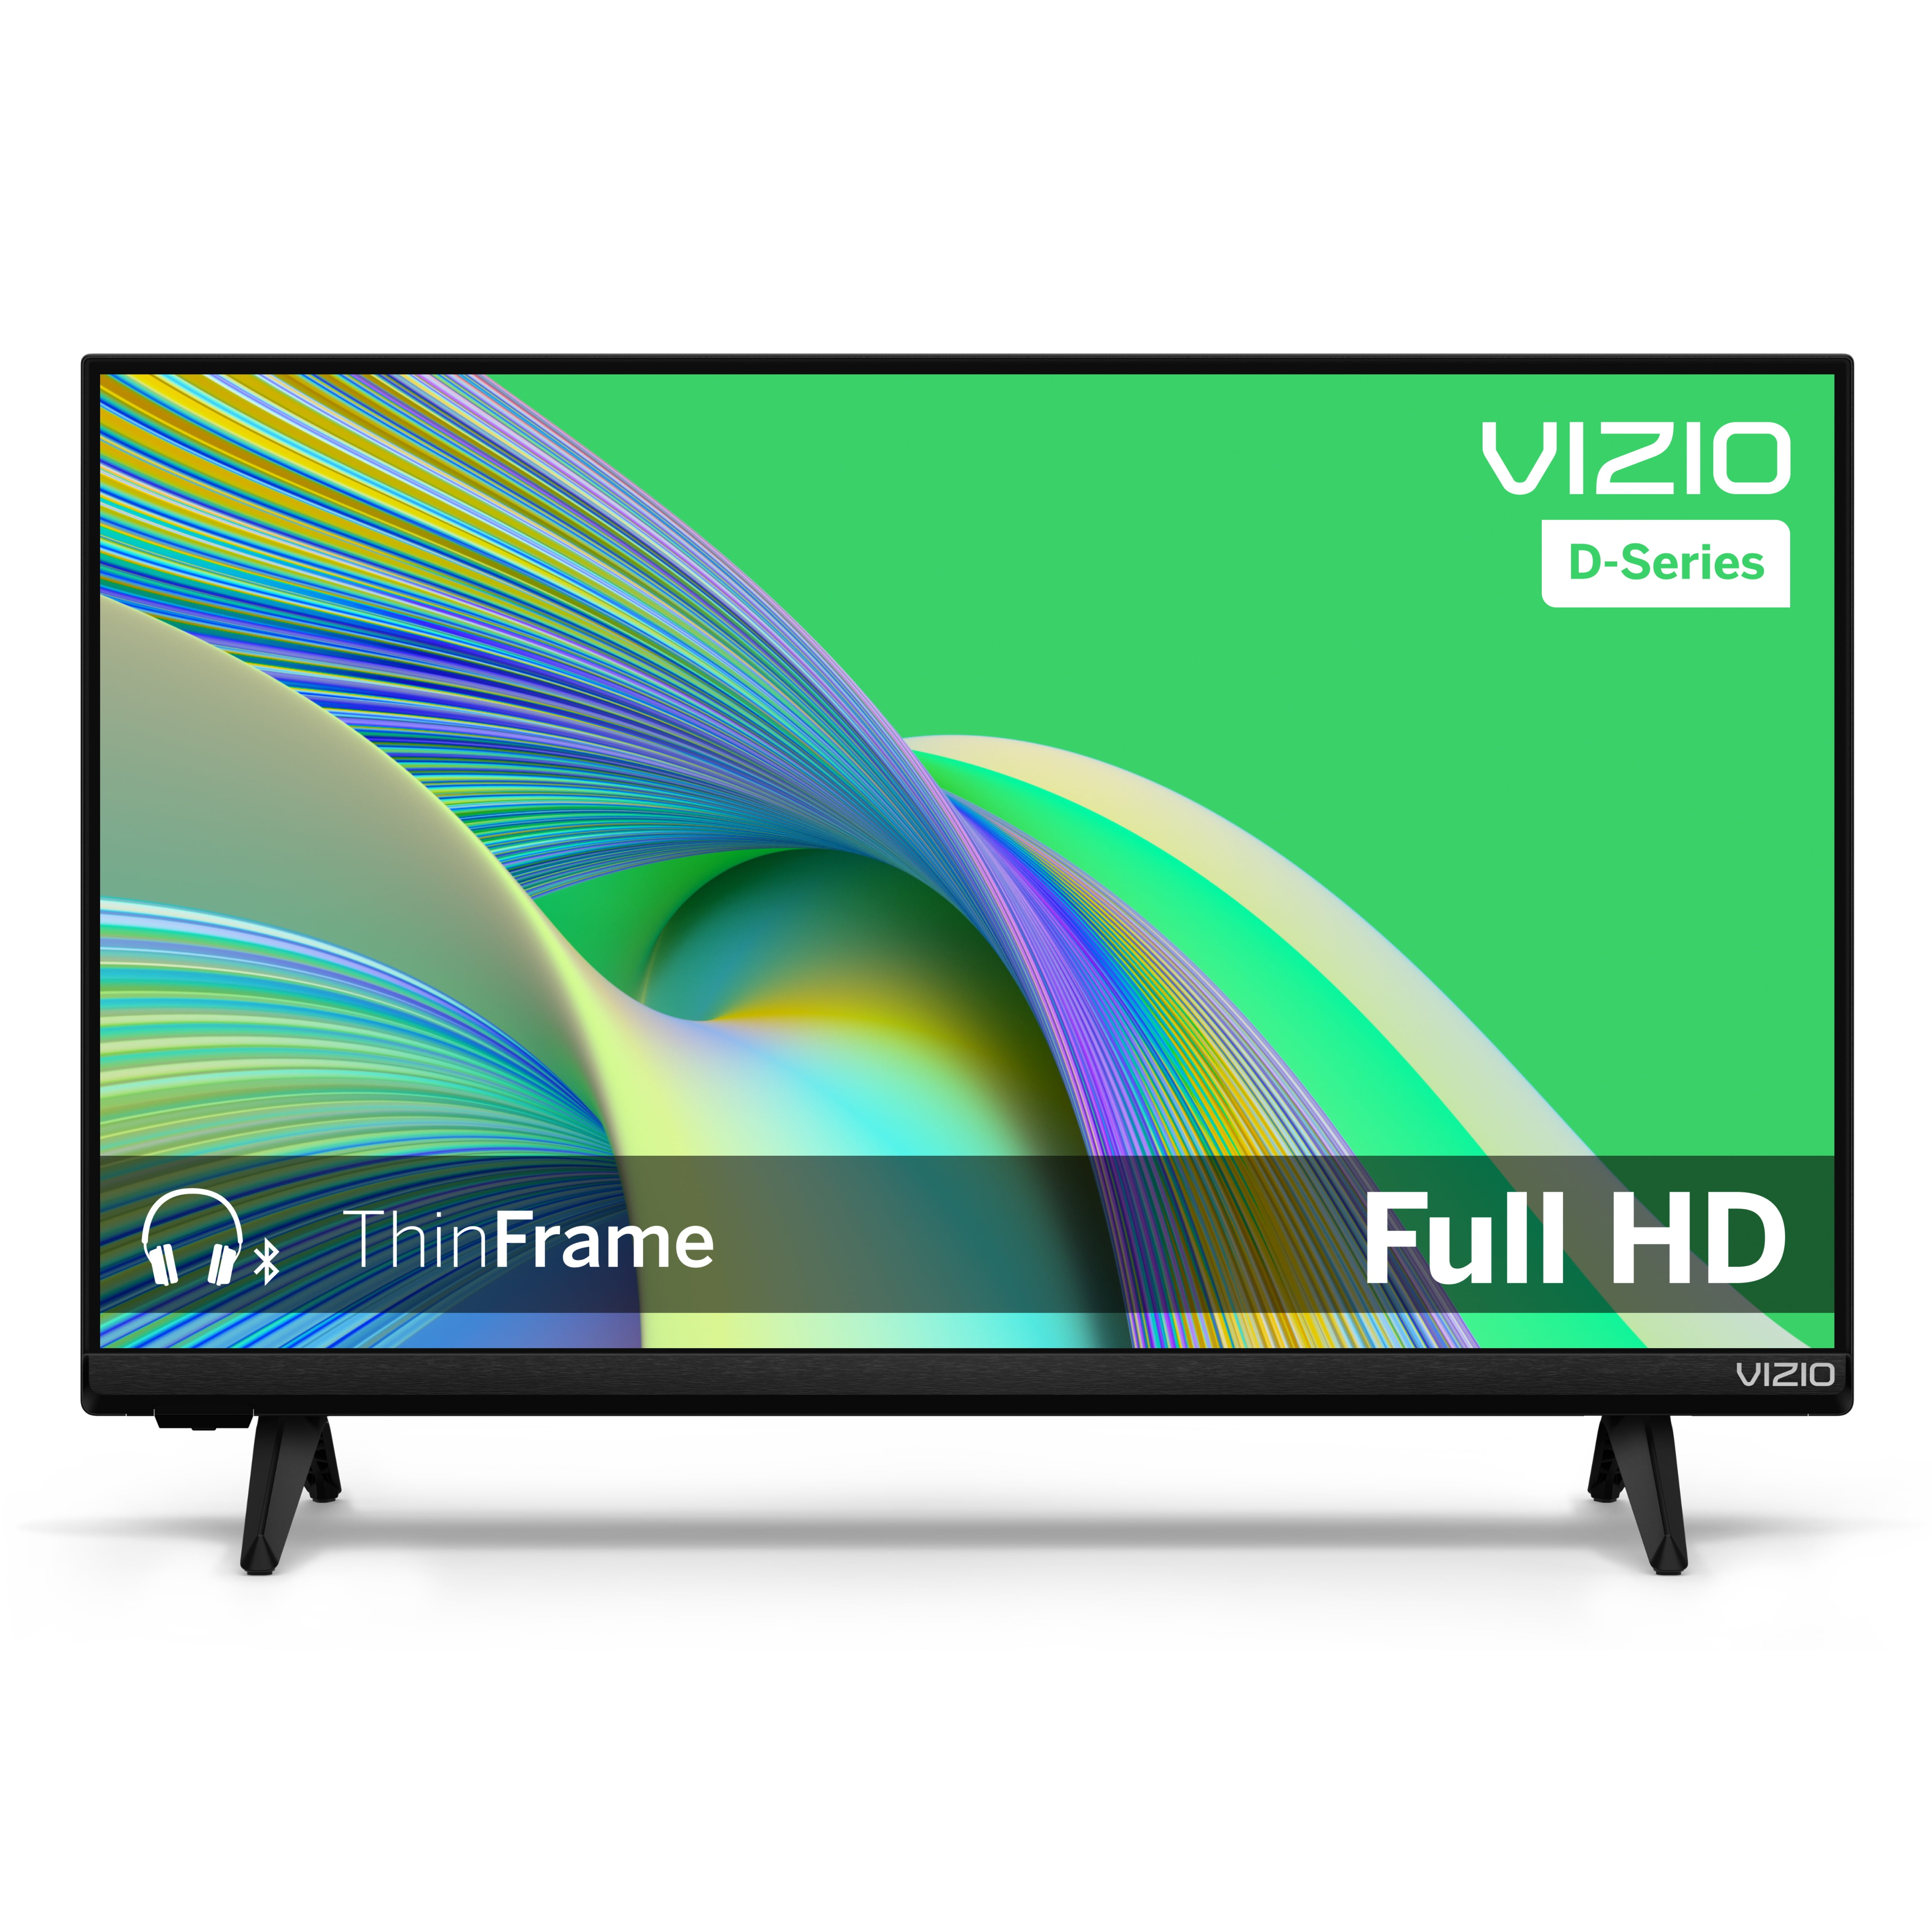 VIZIO 24 Class D-Series FHD LED Smart TV for Gaming and Streaming,  Bluetooth Headphone Capable (Online Only) D24fM-K01 